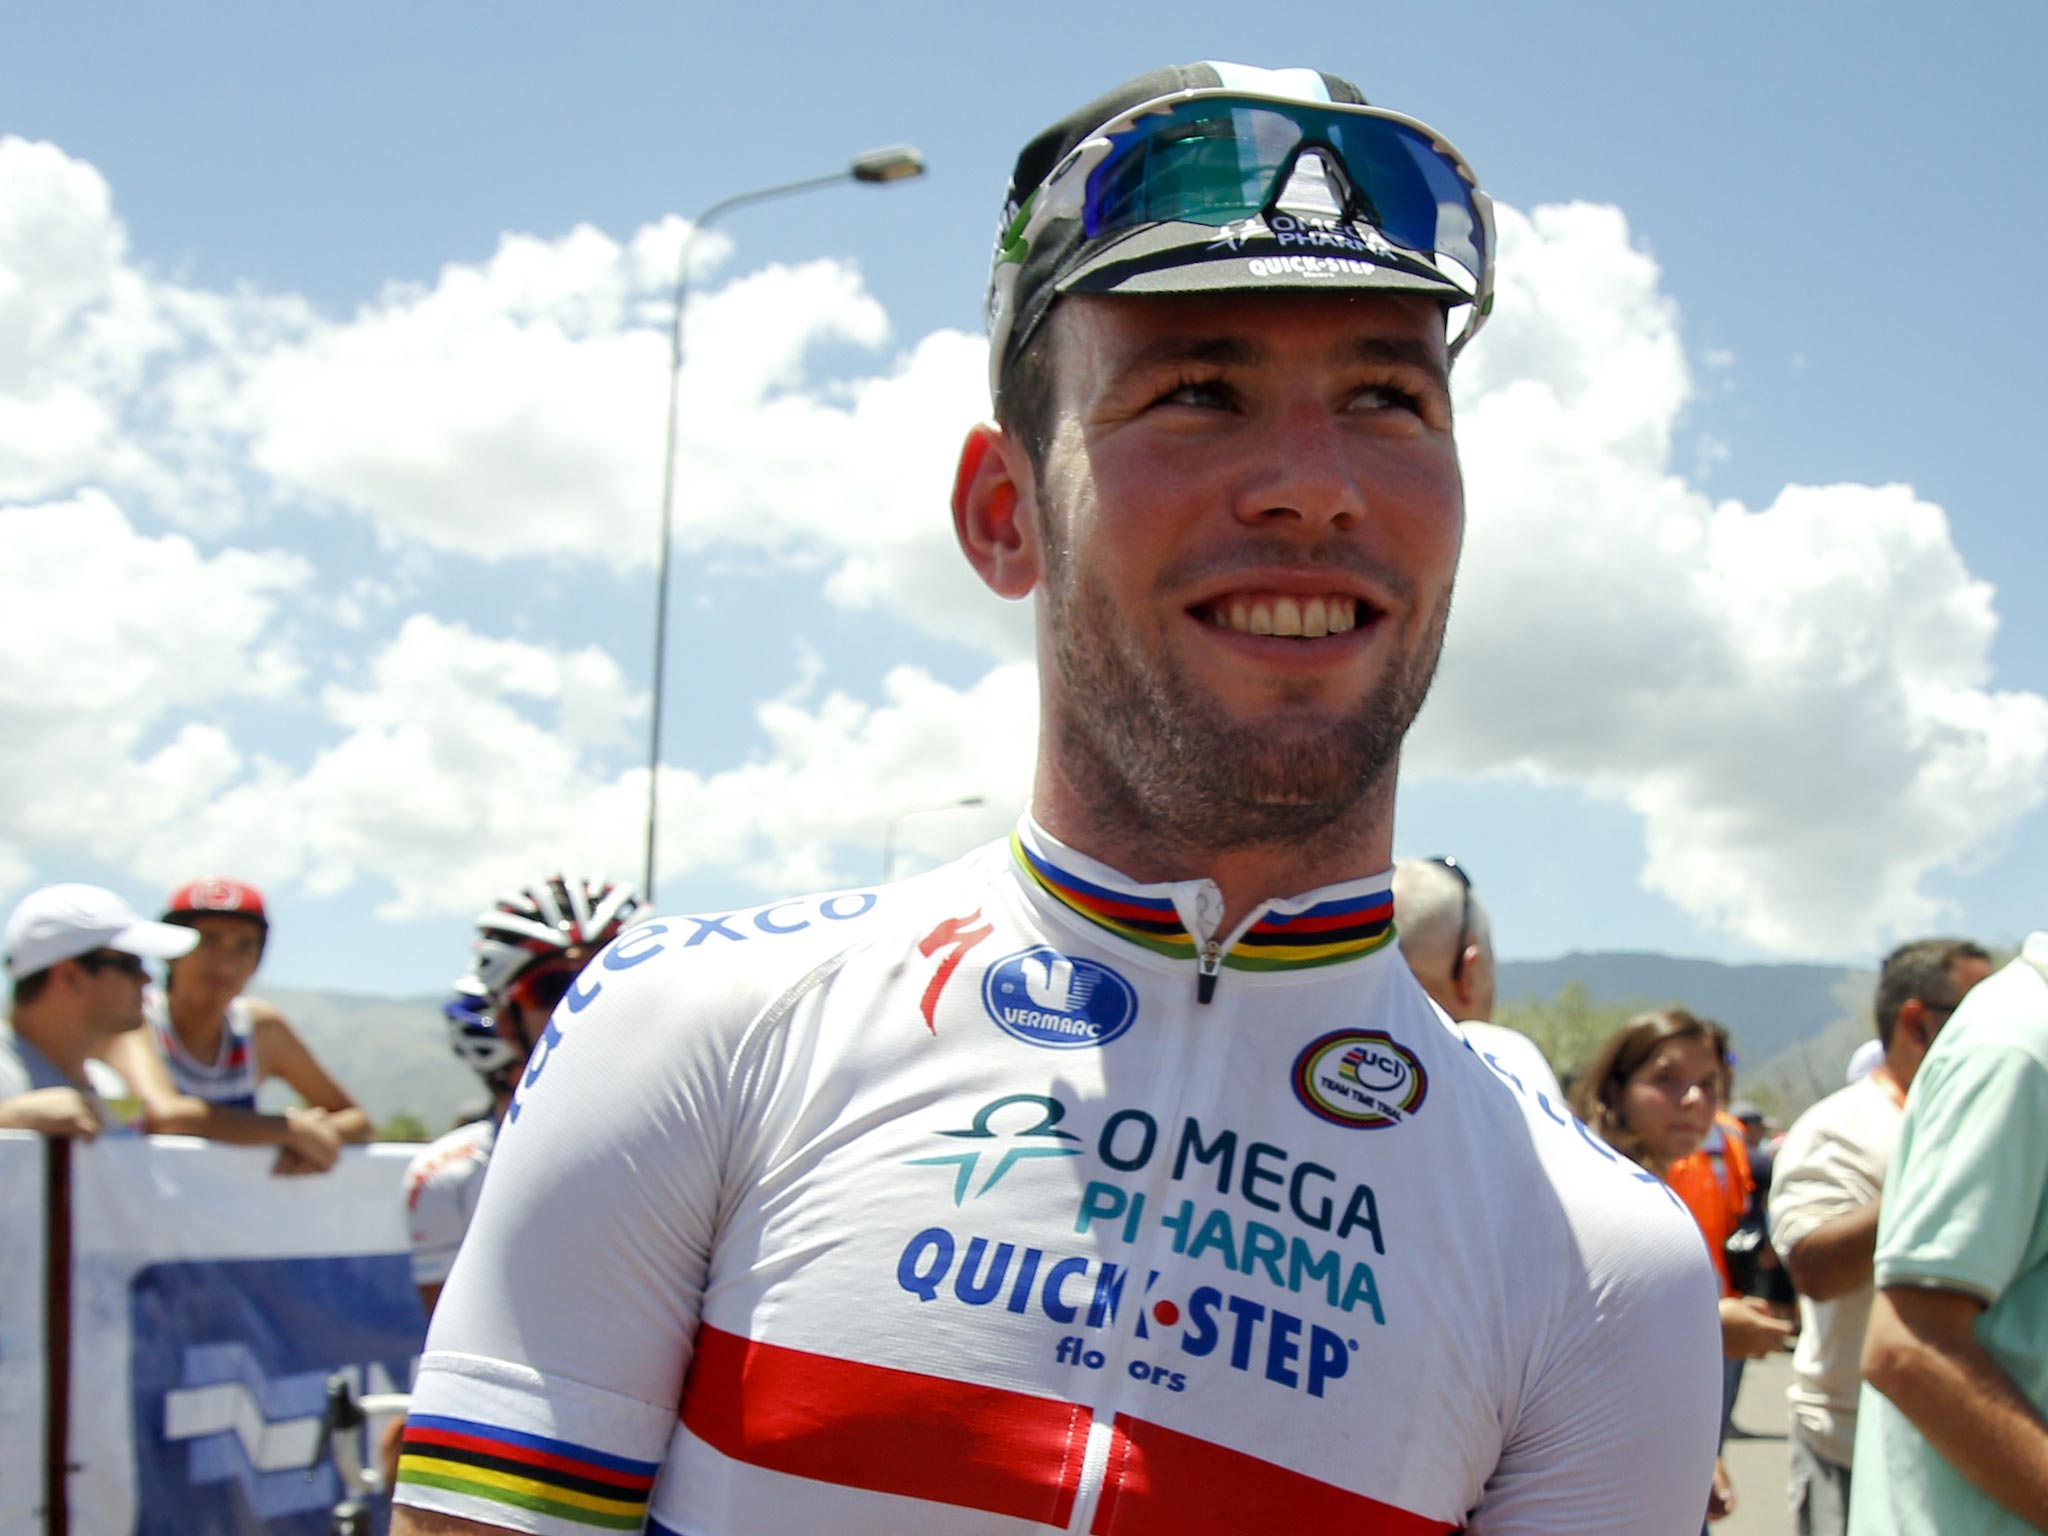 Mark Cavendish sprinted to his first win of the season on stage five of the Volta ao Algarve